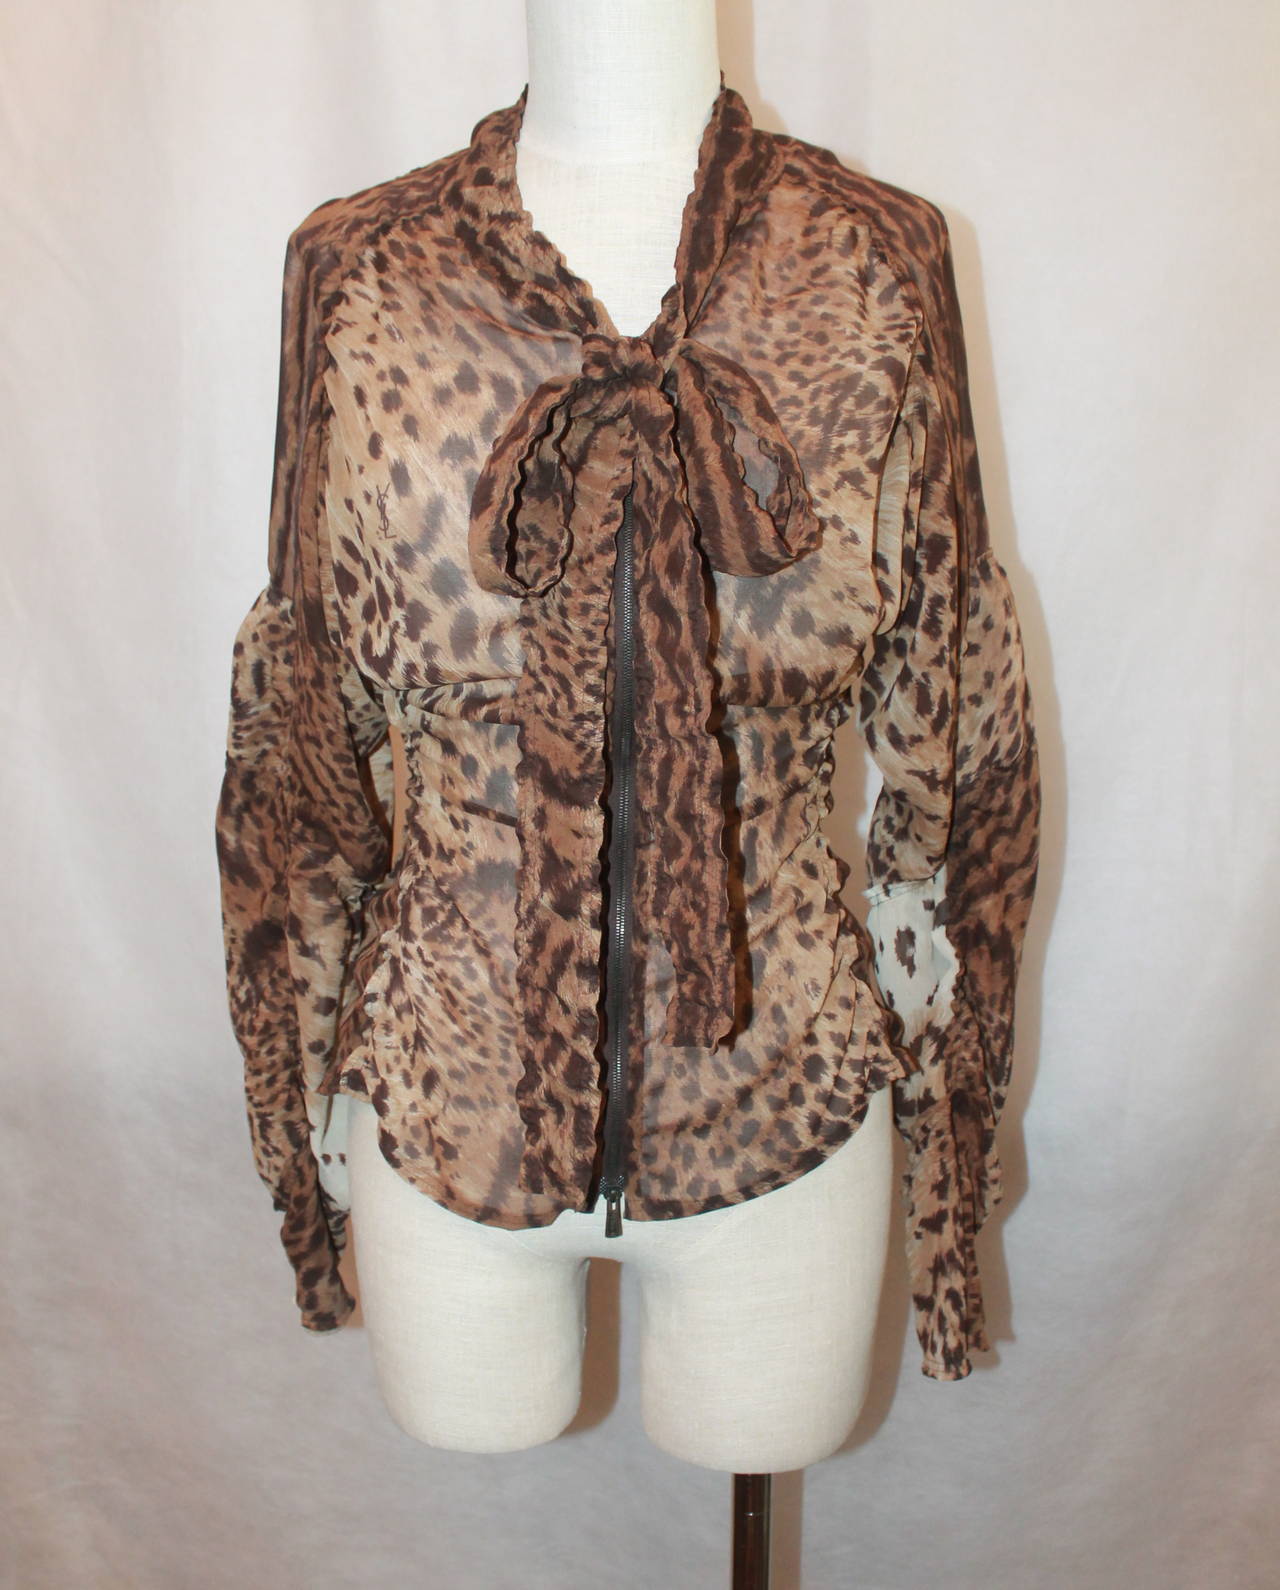 YSL Leopard Printed Sheer Blouse with Gatherings - S. This top is in excellent condition and has a long zipper as closure. The neckline is ruched and there are gatherings on the sleeves & sides. It also has a necktie. 

Measurements:
Bust-